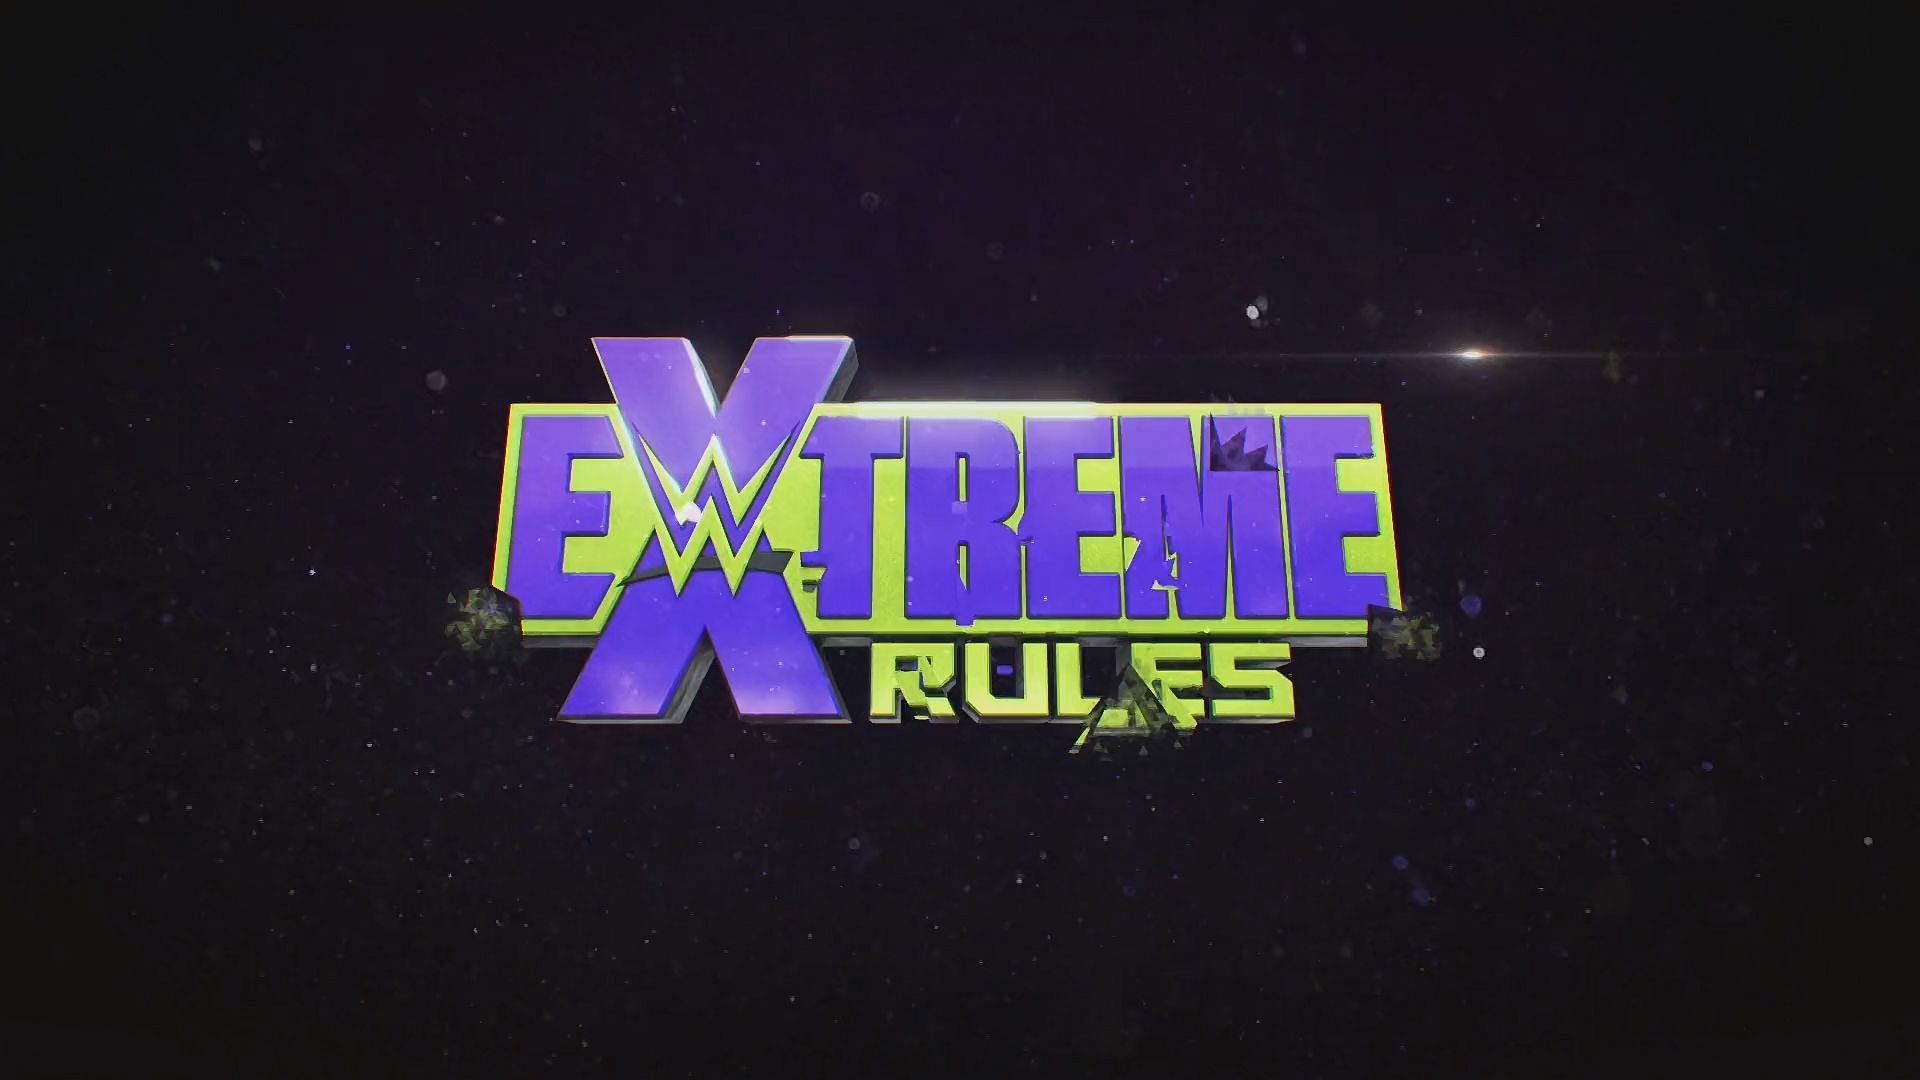 WWE Extreme Rules has some major hype surrounding it